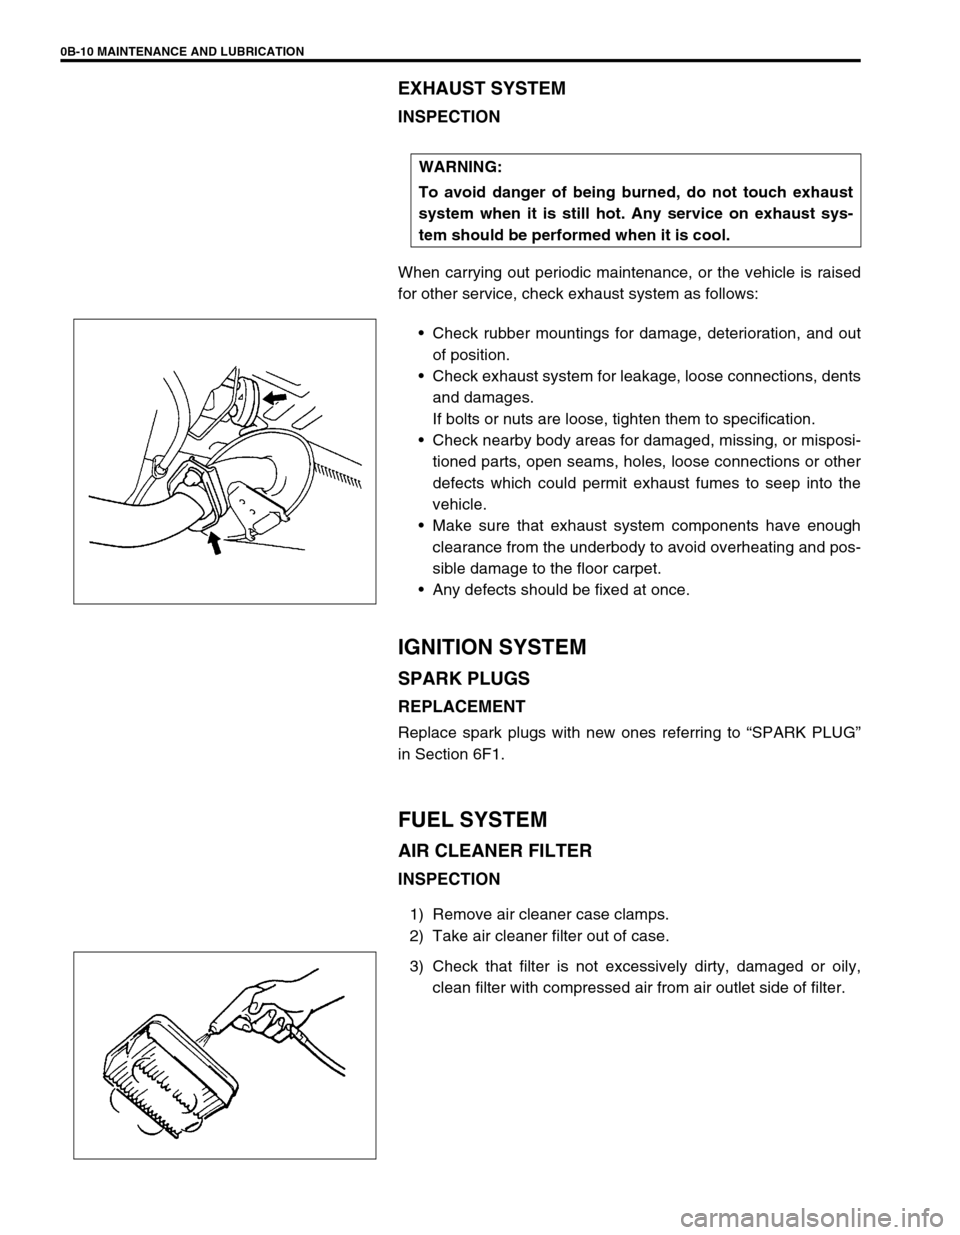 SUZUKI SWIFT 2000 1.G RG413 Service Workshop Manual 0B-10 MAINTENANCE AND LUBRICATION
EXHAUST SYSTEM
INSPECTION
When carrying out periodic maintenance, or the vehicle is raised
for other service, check exhaust system as follows:
Check rubber mountings